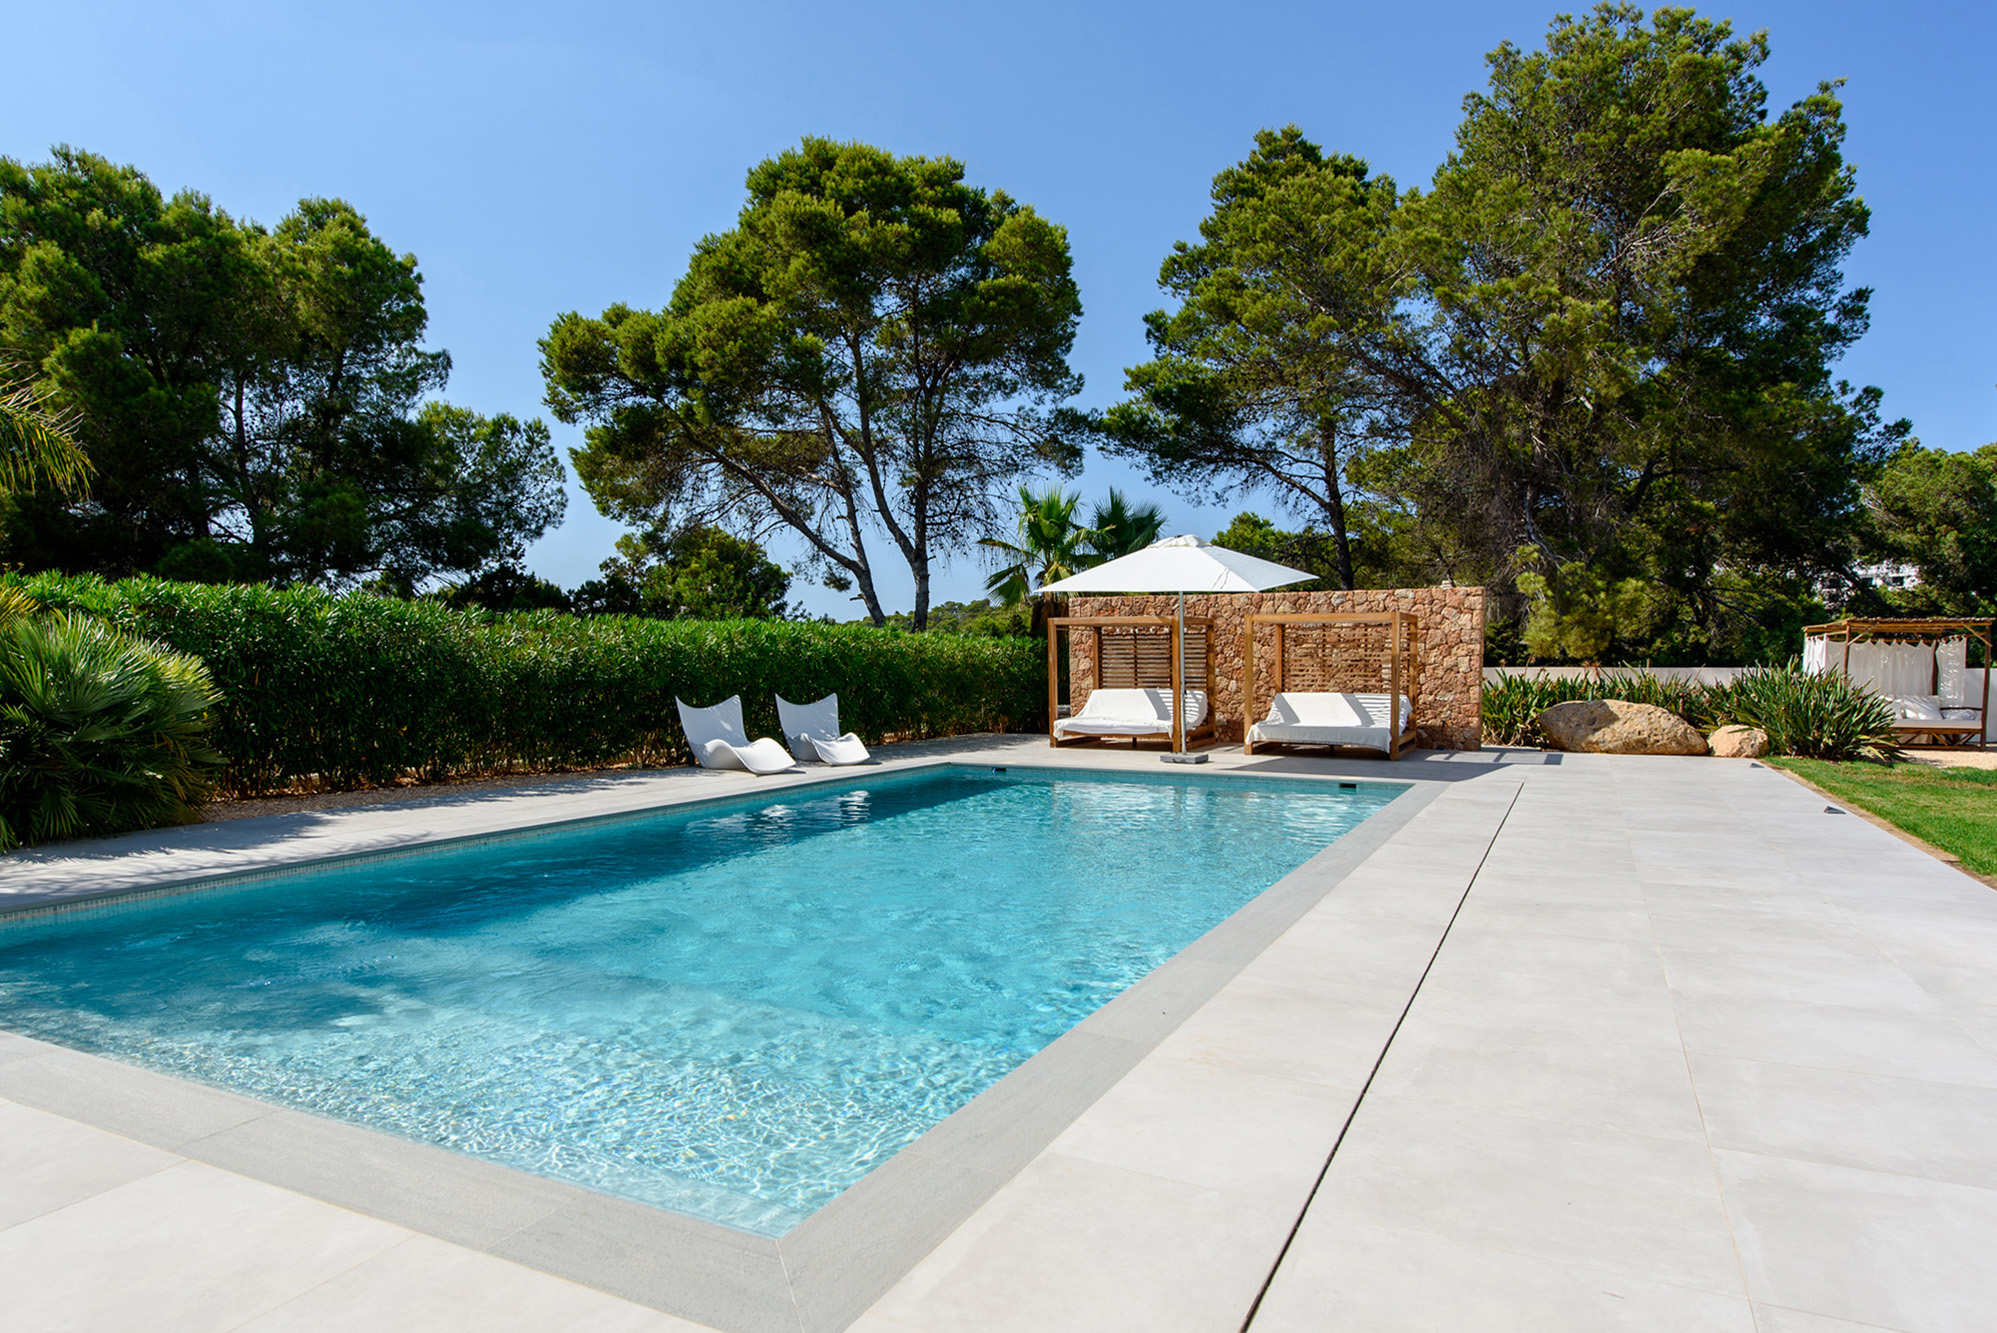 Diagonal view of a swimming pool at a luxury villa in Ibiza